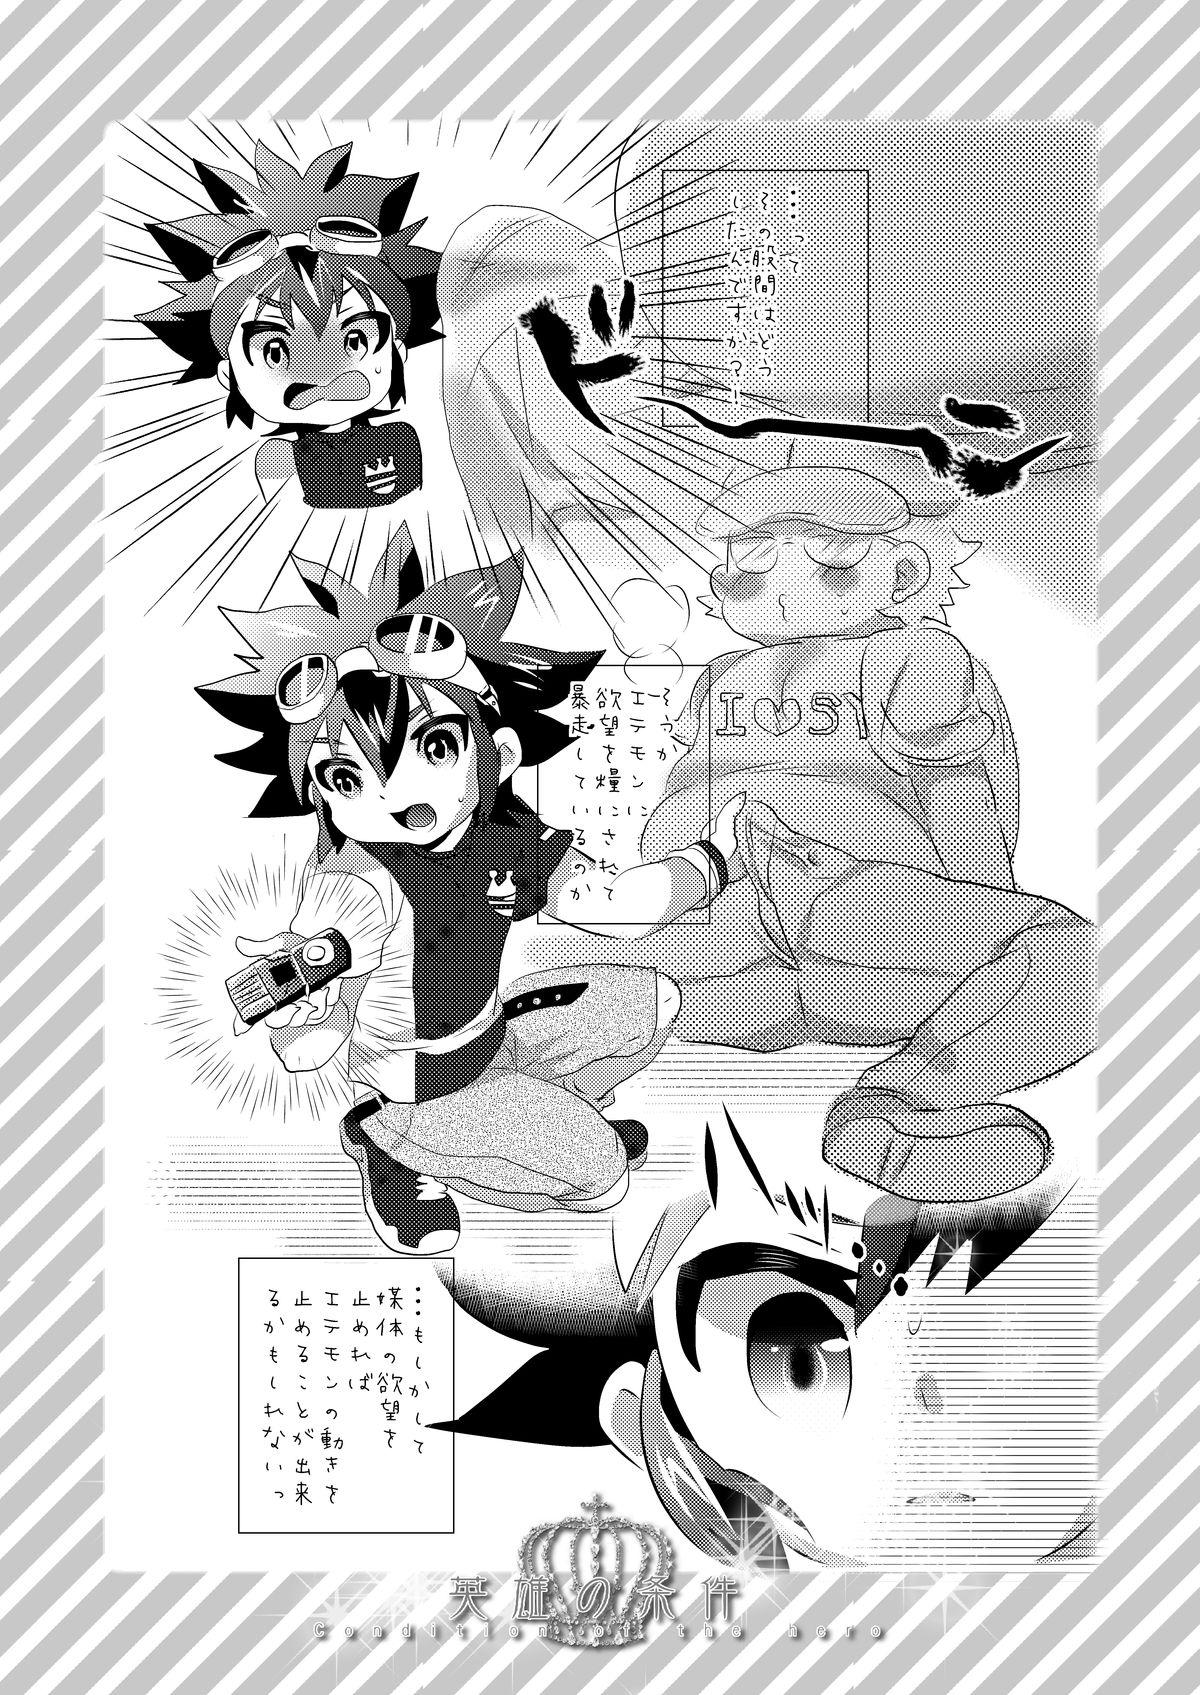 Cumload Eiyuu no Jouken - Condition of the Hero - Digimon xros wars Passion - Page 4